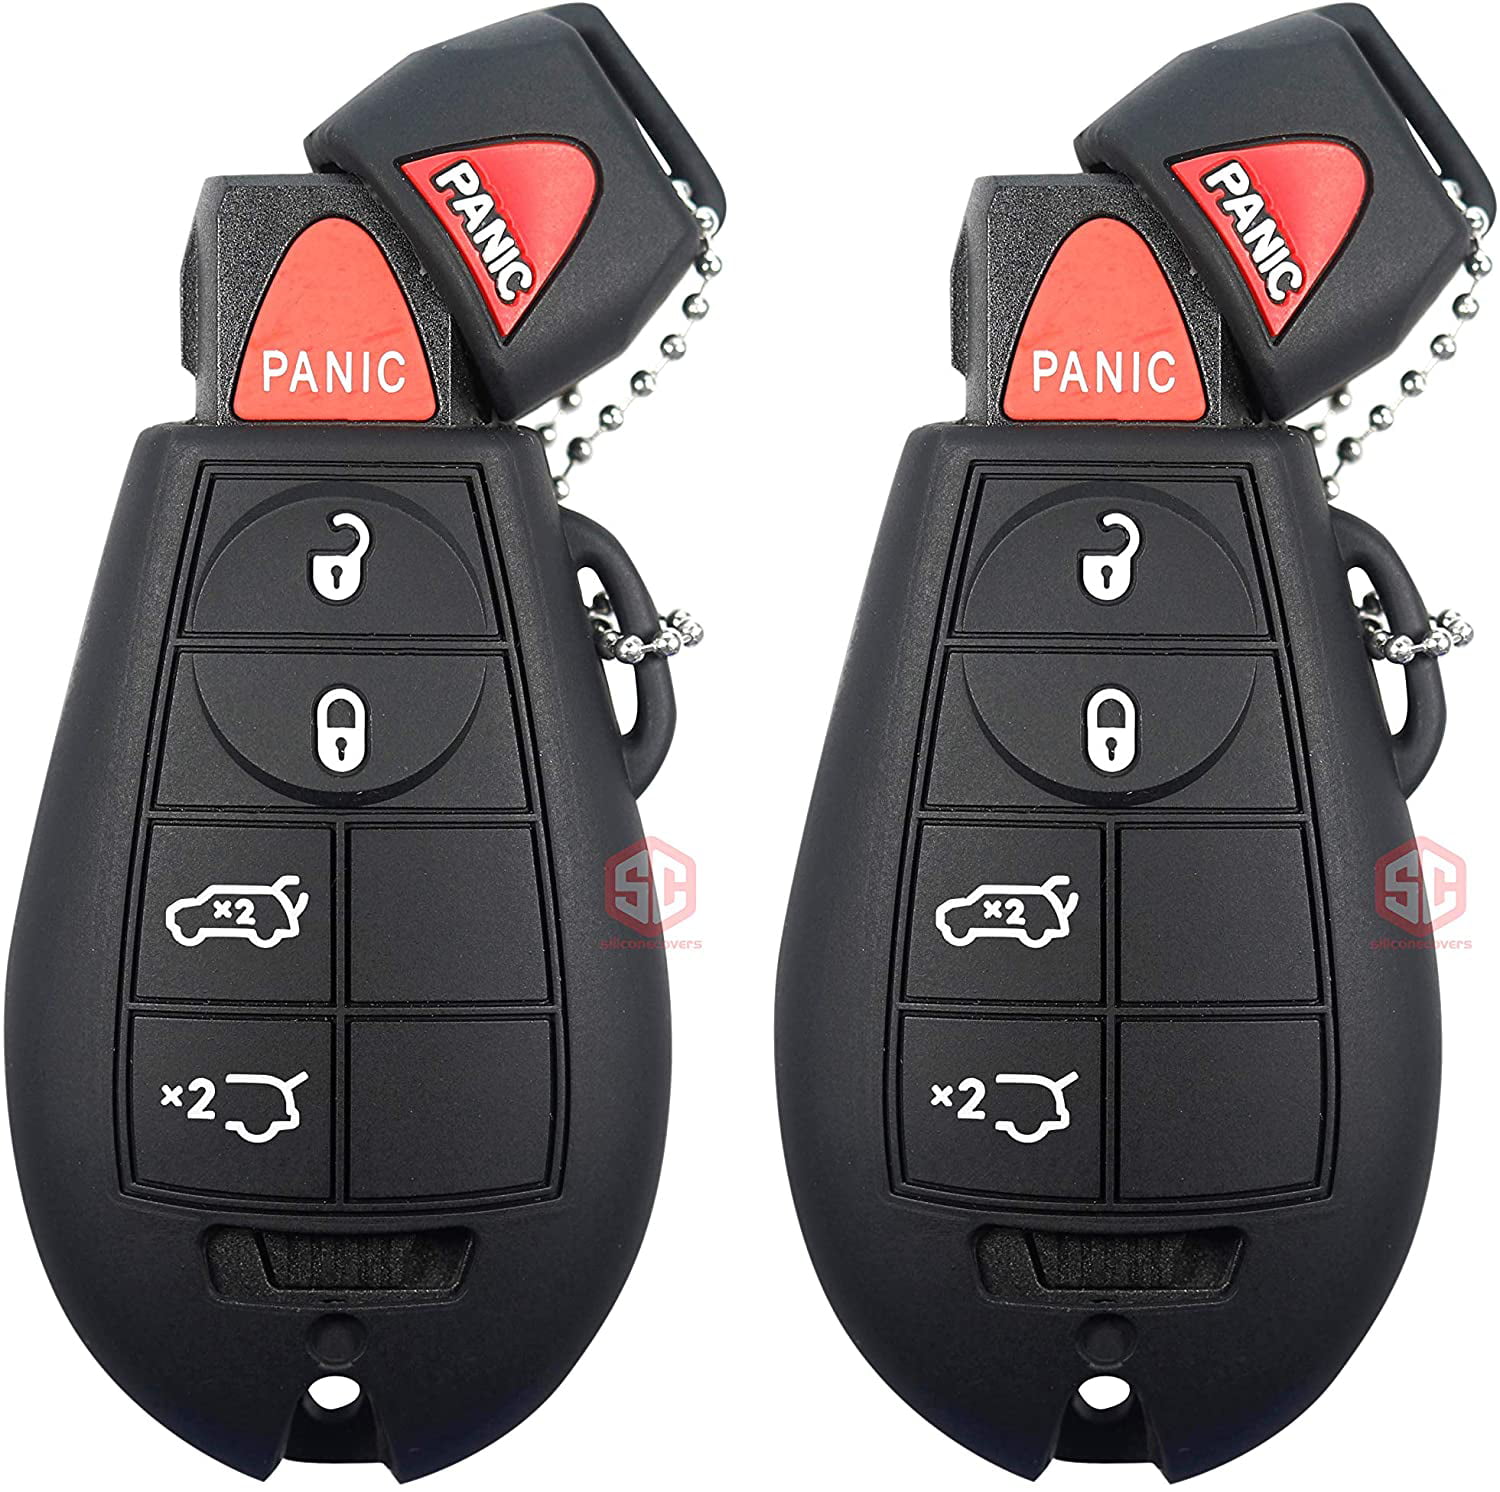 Grand Cherokee. 2x New Key Fob Remote Fobik 5 buttons Silicone Cover Fit/For Jeep Commander 